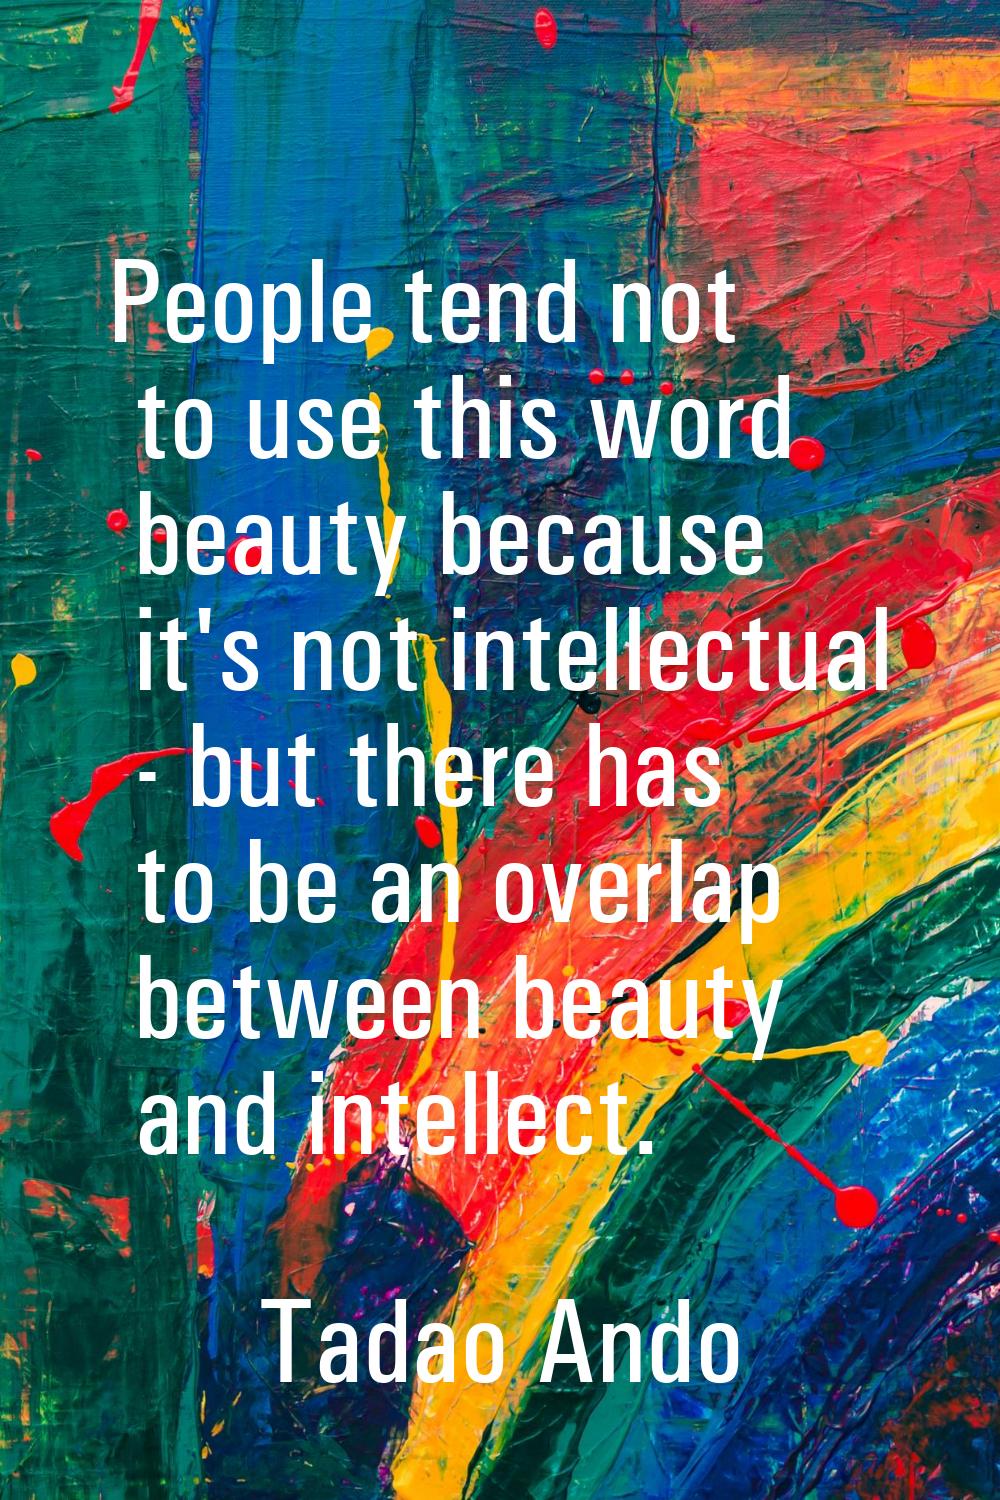 People tend not to use this word beauty because it's not intellectual - but there has to be an over